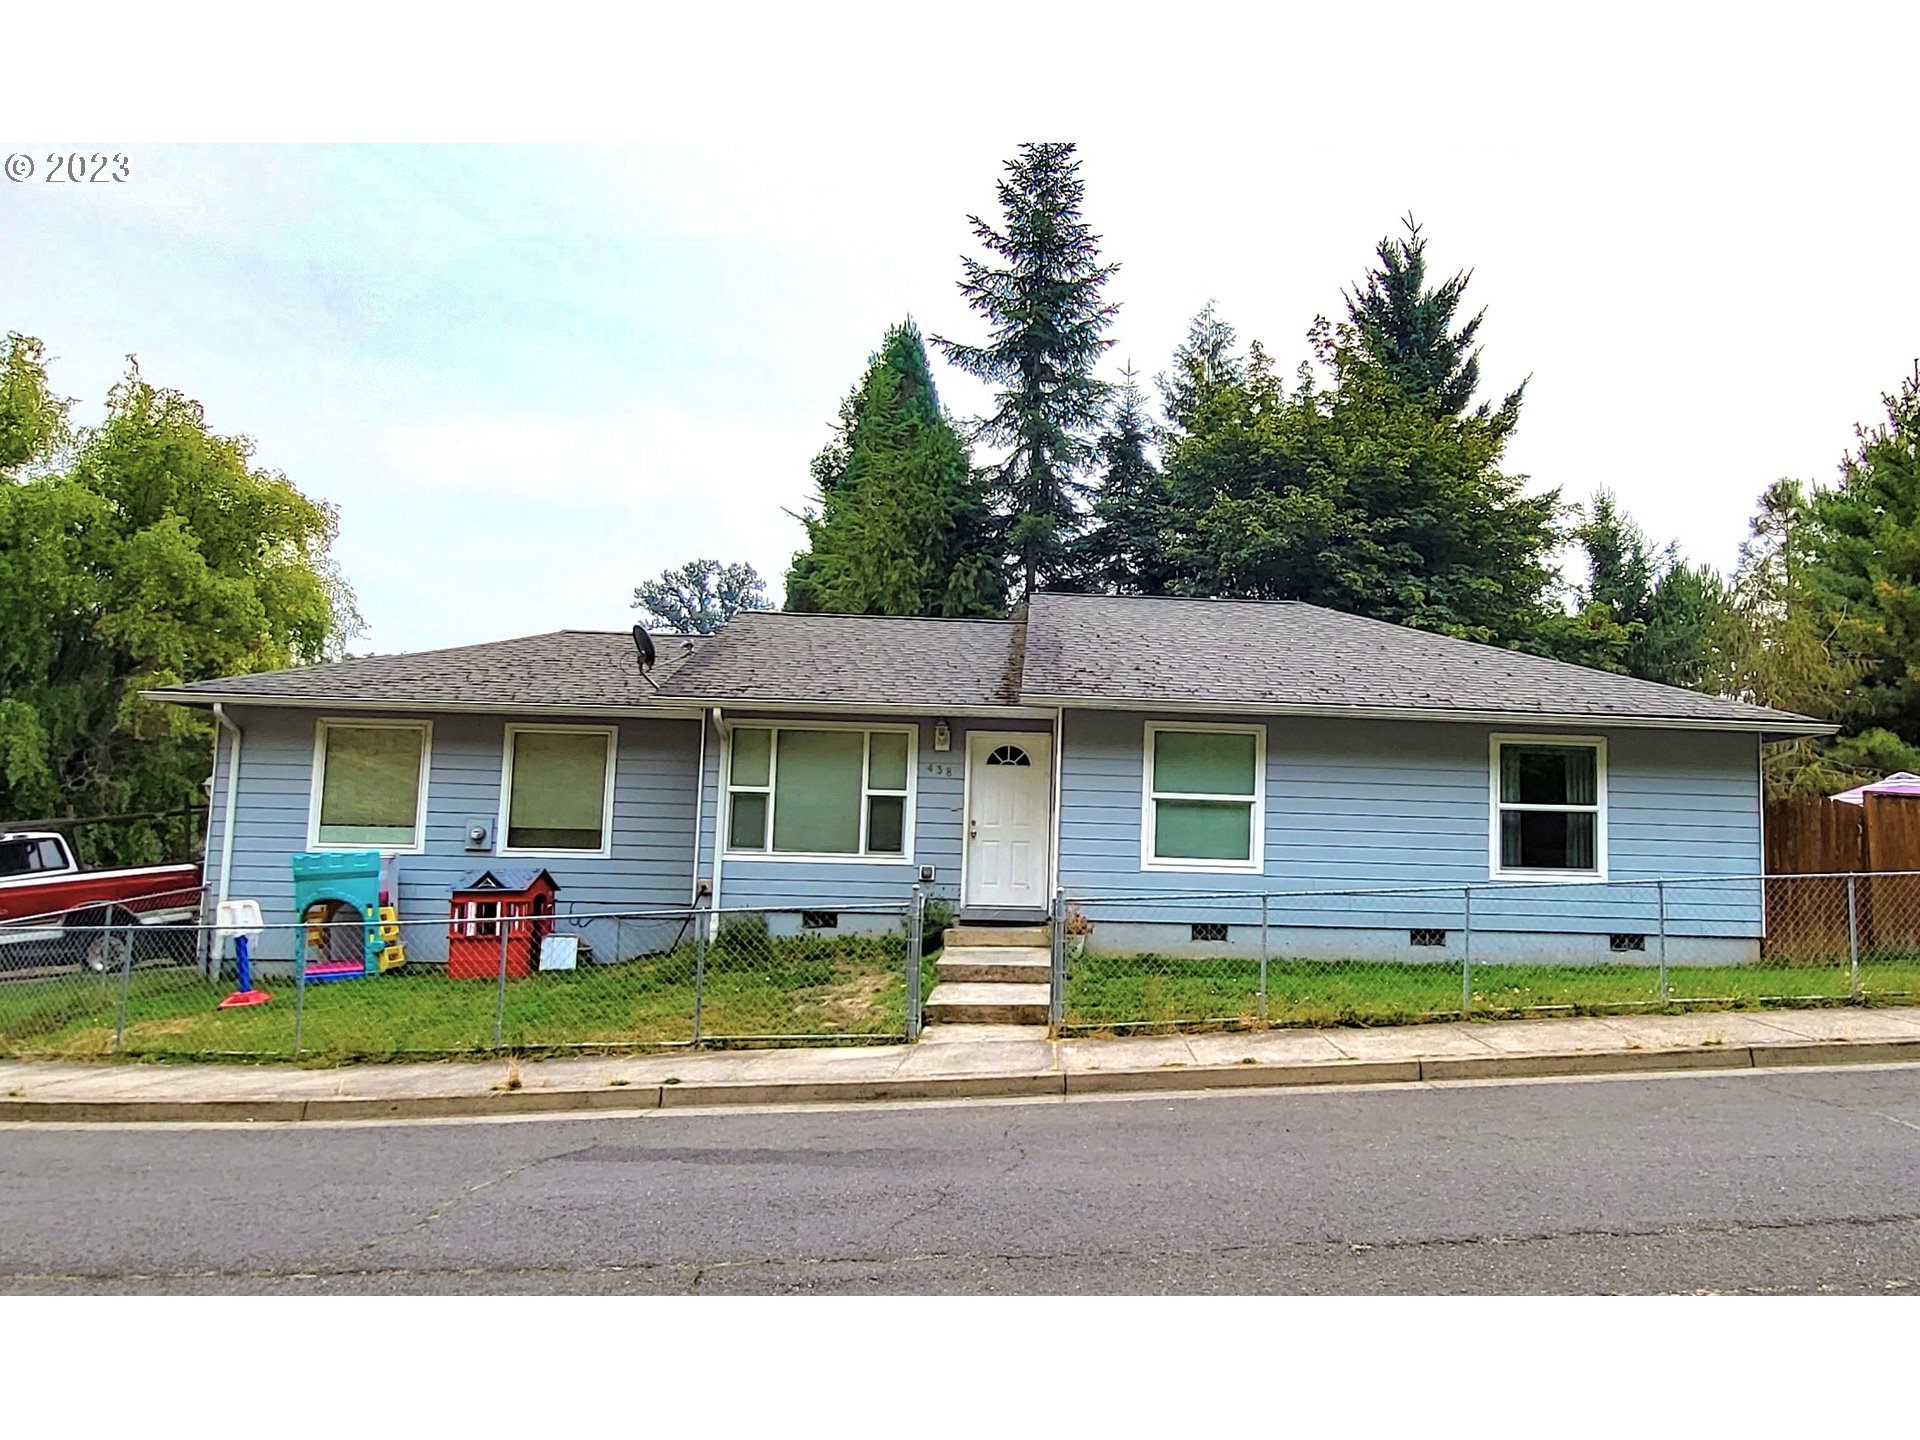 New on market. Just blocks to the Coast Fork Willamette River you'll find this charming 2004 built home with 3-bedrooms, 2-bathrooms, 2 car garage, forced air, AC, fenced front yard, raised garden bed, and more. Shown by appointment only.